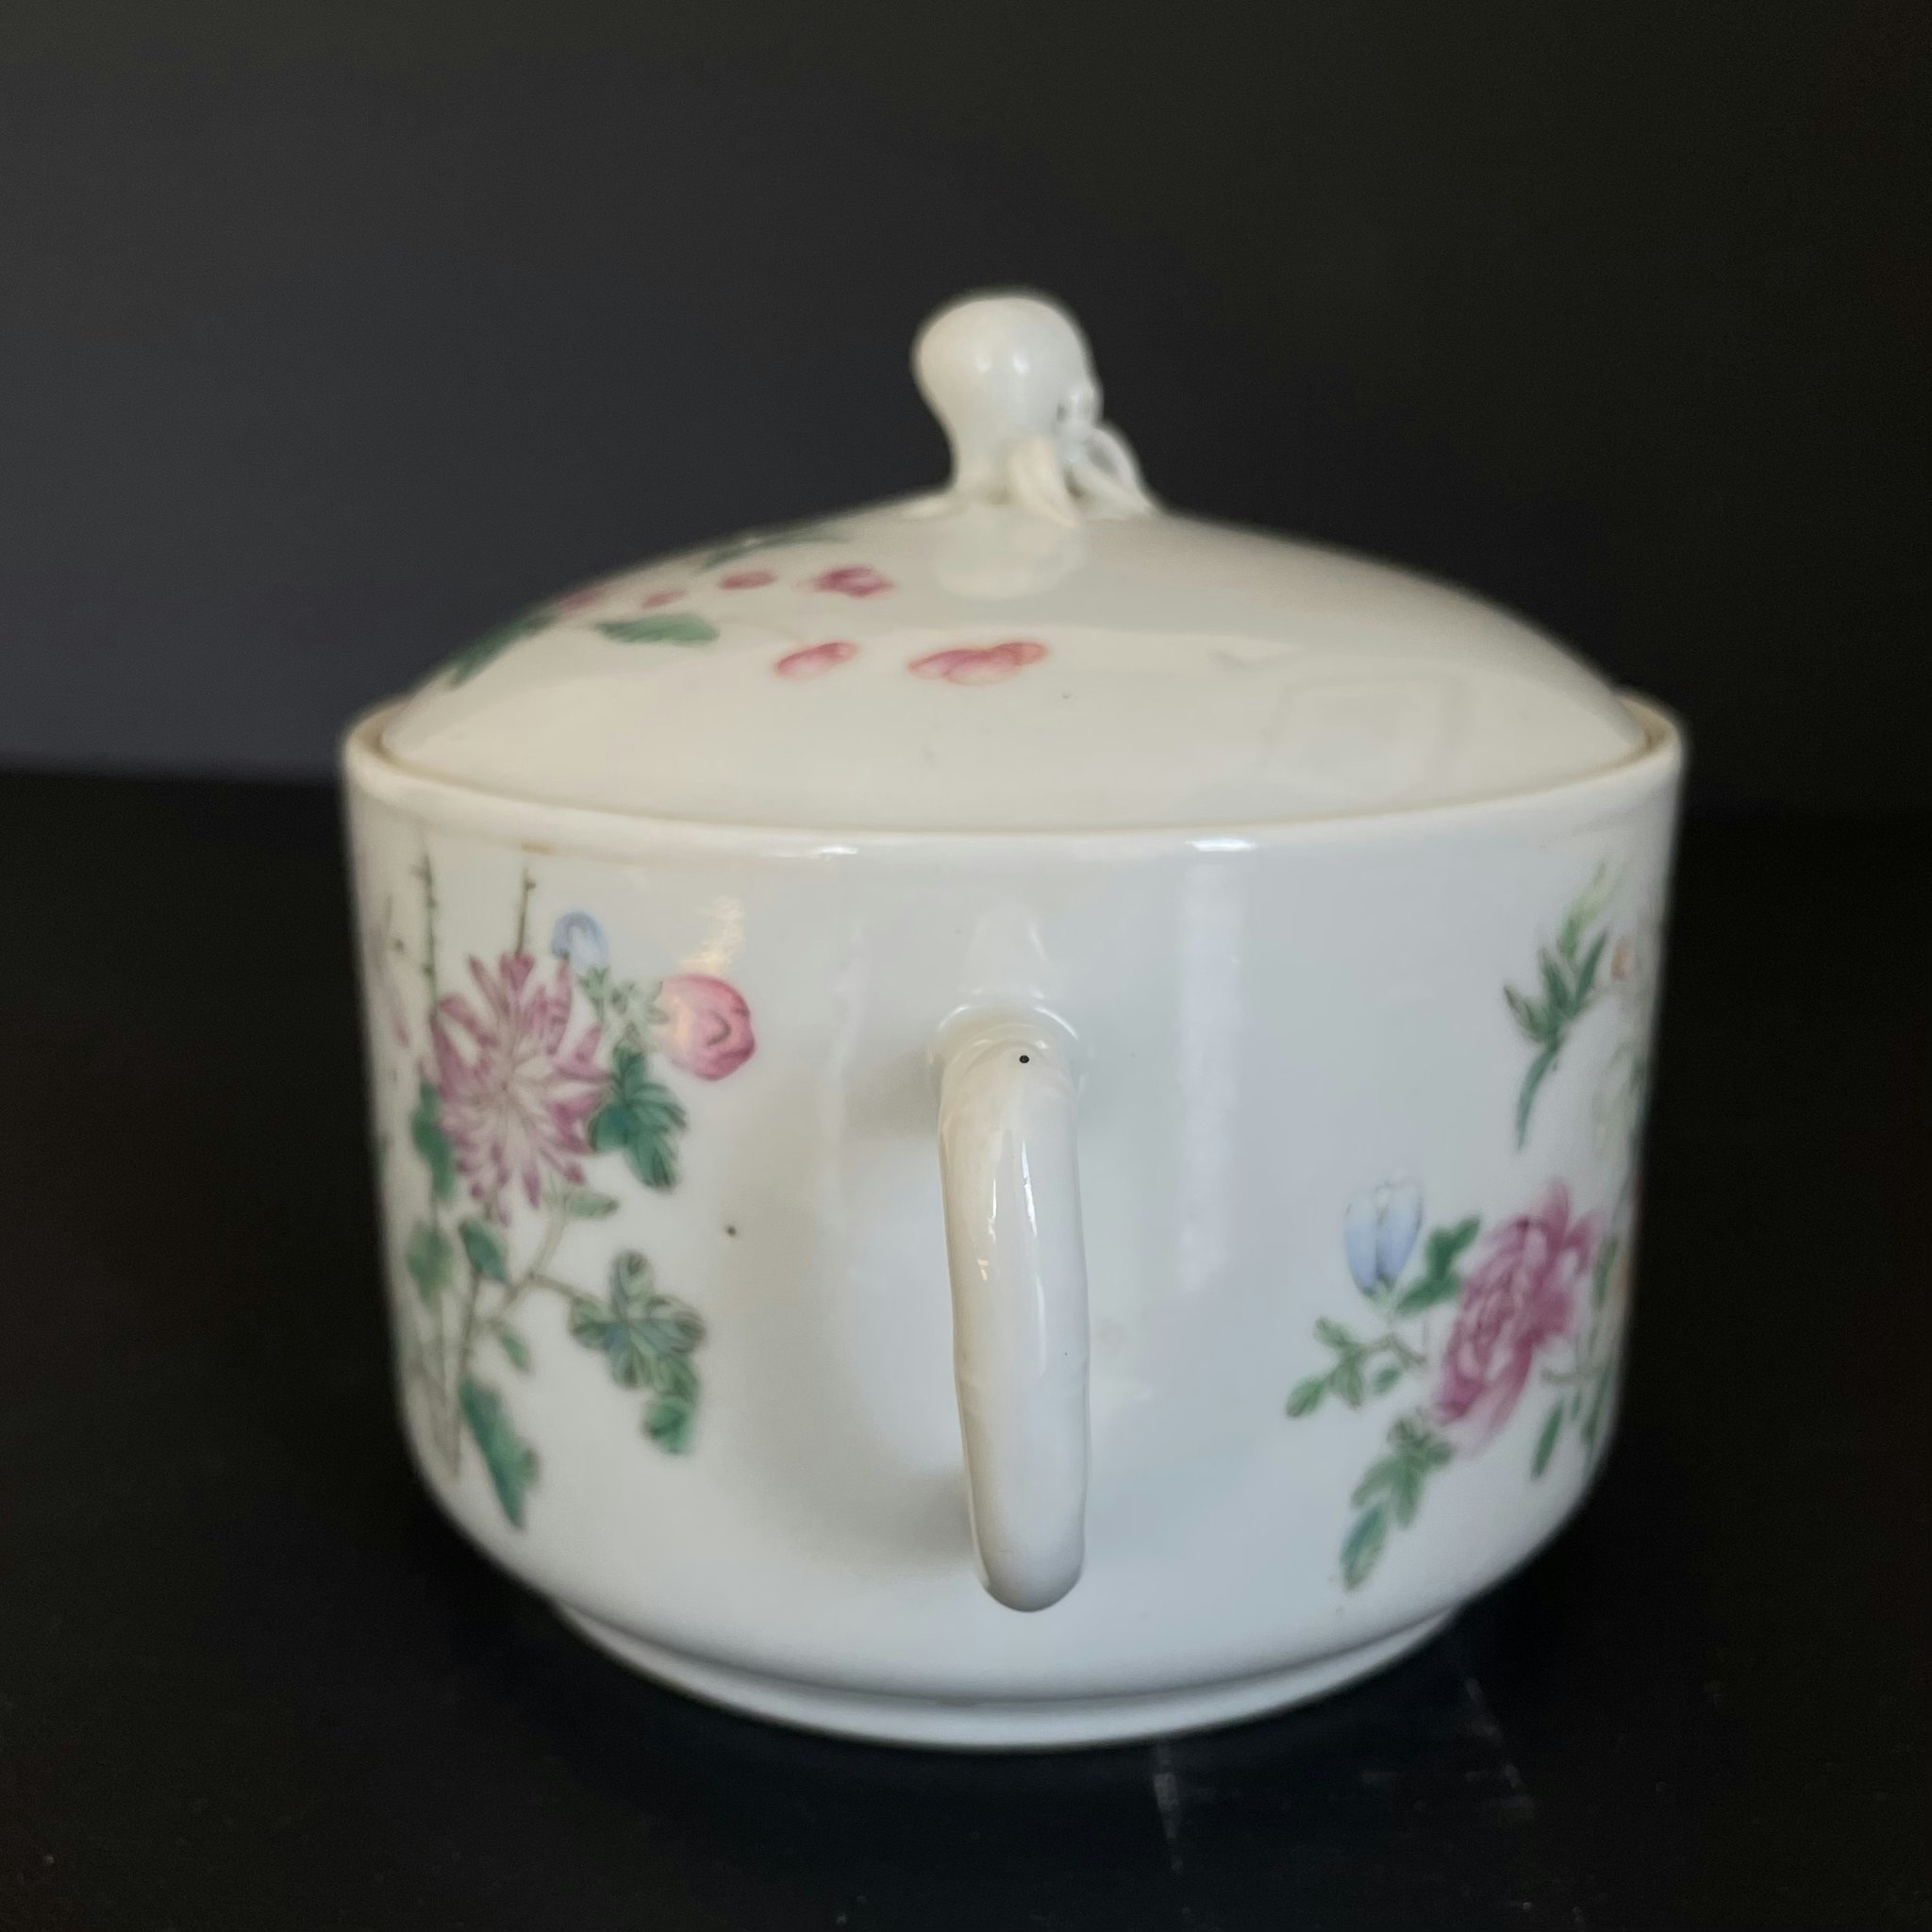 Chinese Antique famille rose teapot 19th century #1582